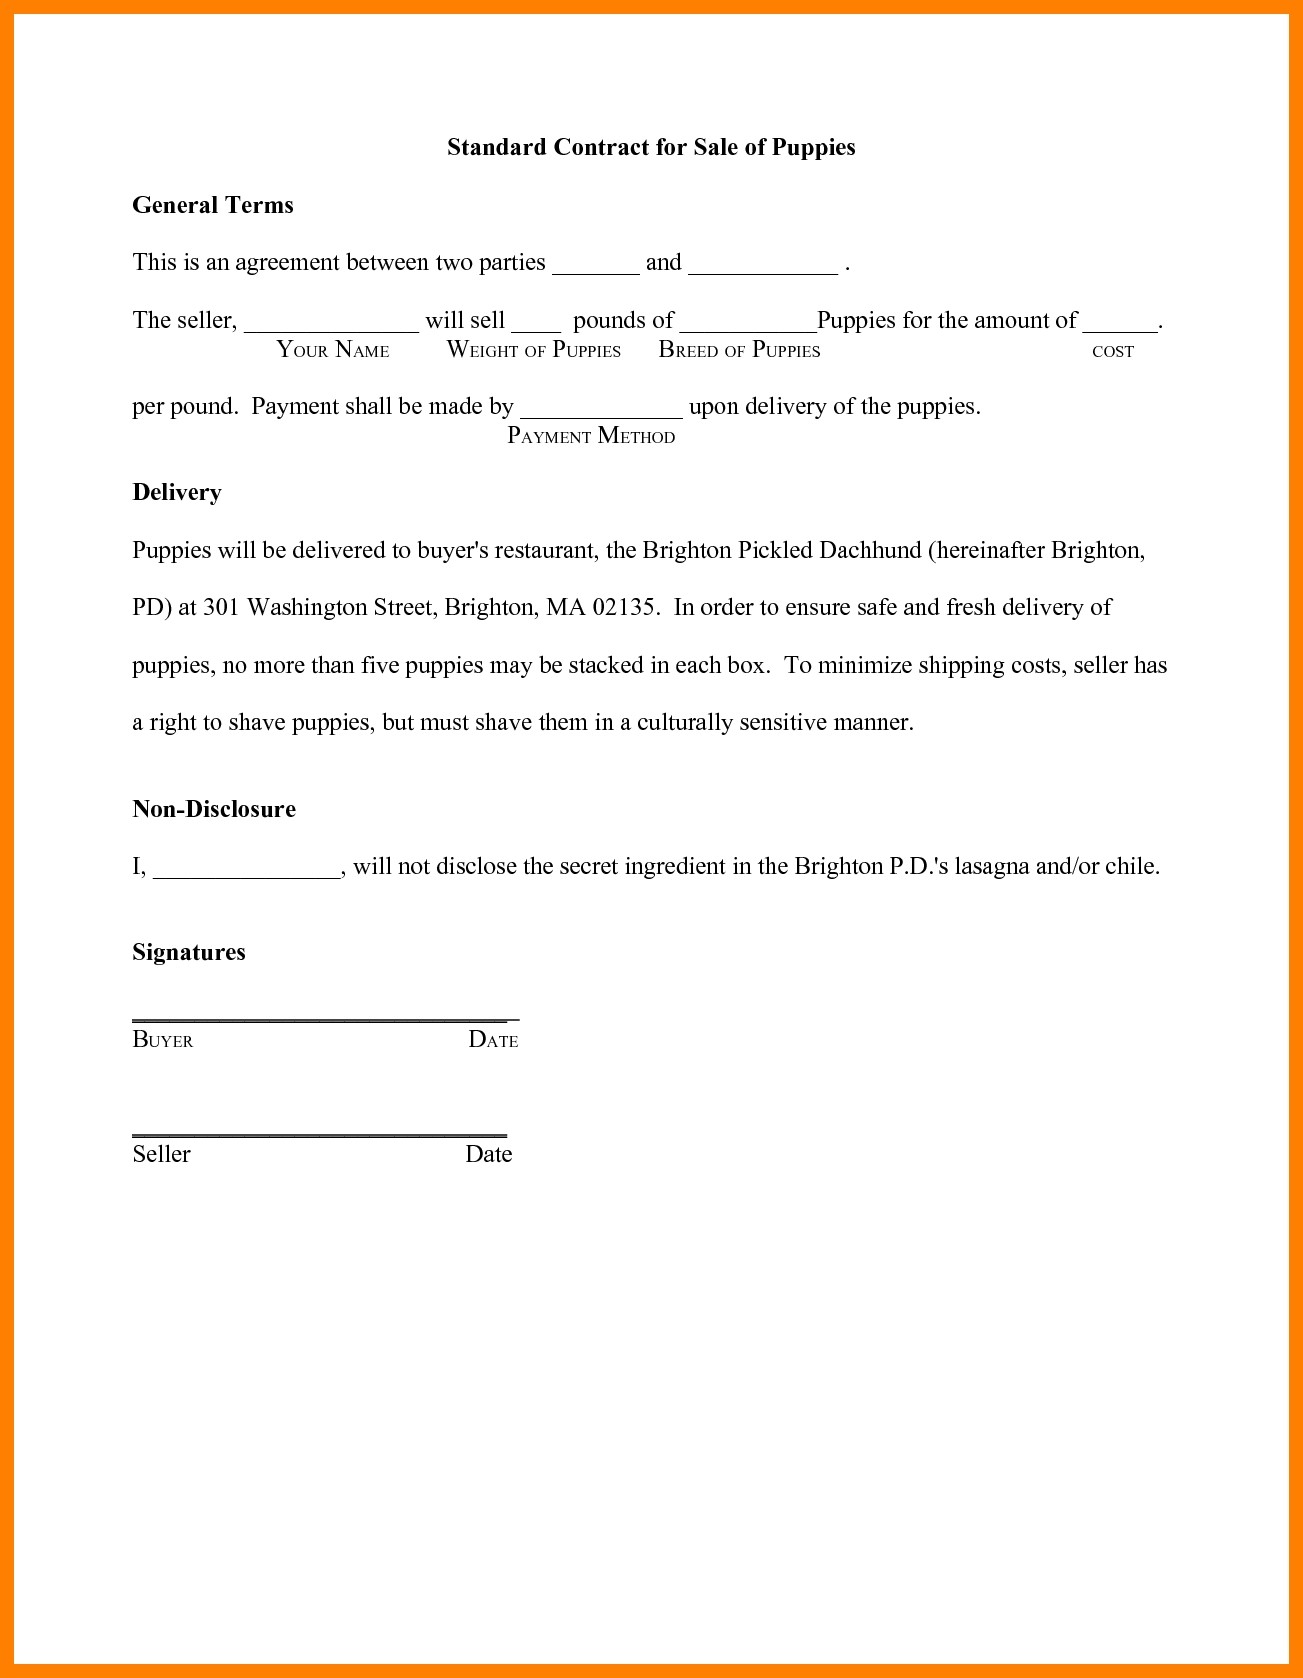 Contract Sample Between Two Parties Brave100818 Com Document Simple Agreement